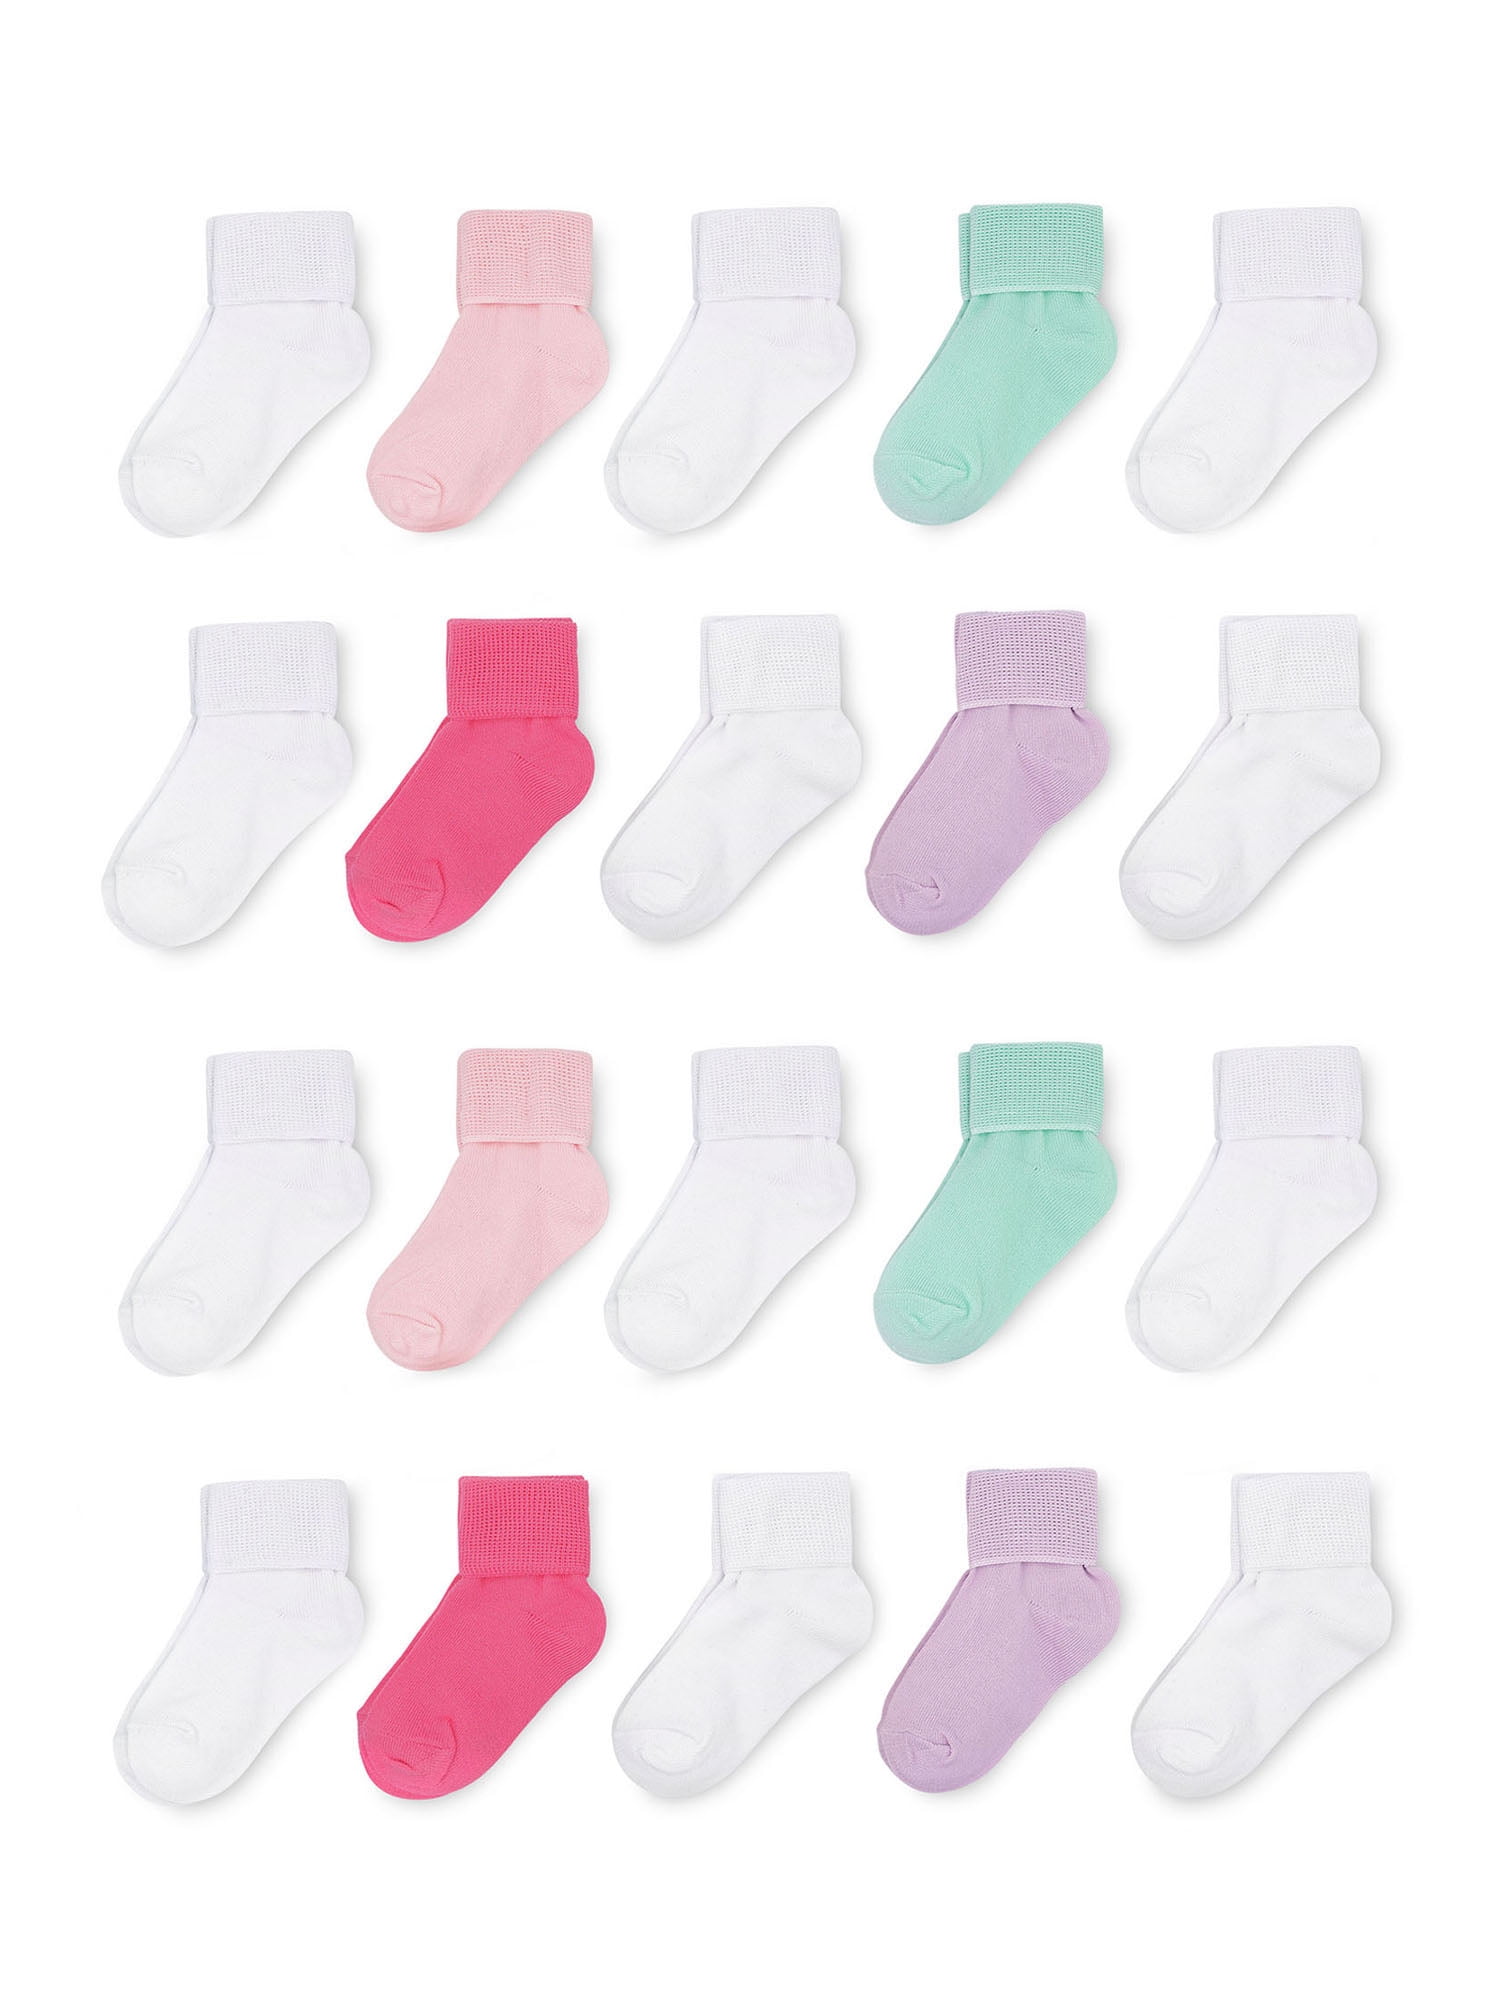 Details about   Wonder Nation Baby Girls Low Cut Ankle Fashion Socks 6pk 